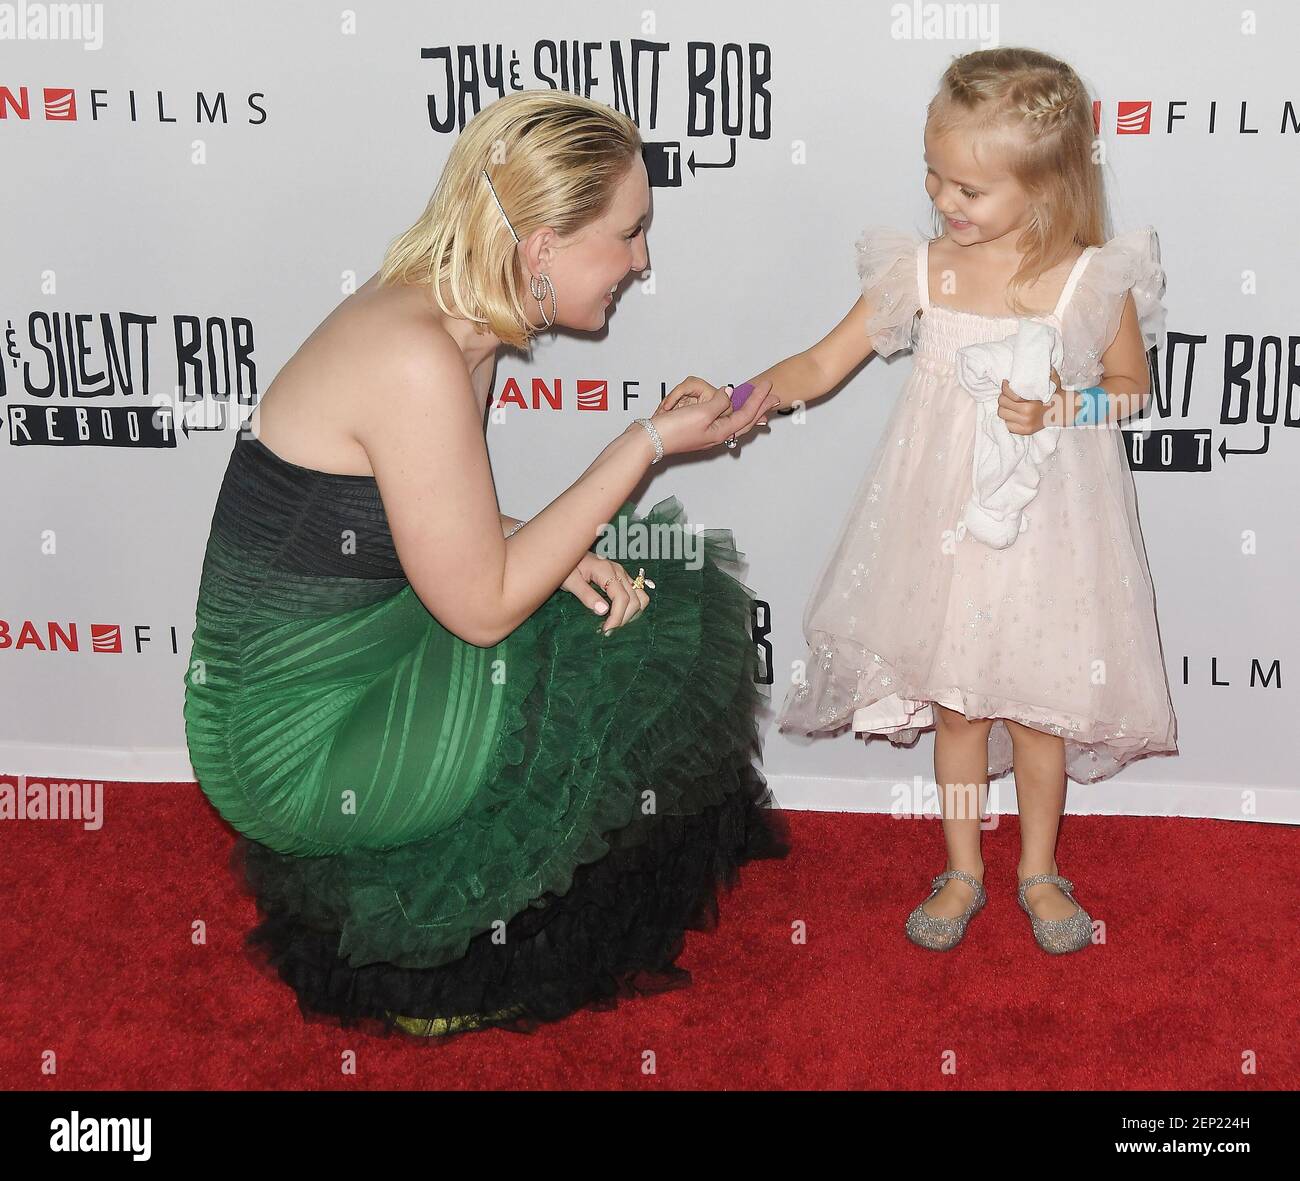 L-R) Harley Quinn Smith with Jason Mewes' daughter Logan Lee Mewes at the  JAY AND SILENT BOB REBOOT Los Angeles Screening held at the TCL Chinese  Theatre in Hollywood, CA on Monday,